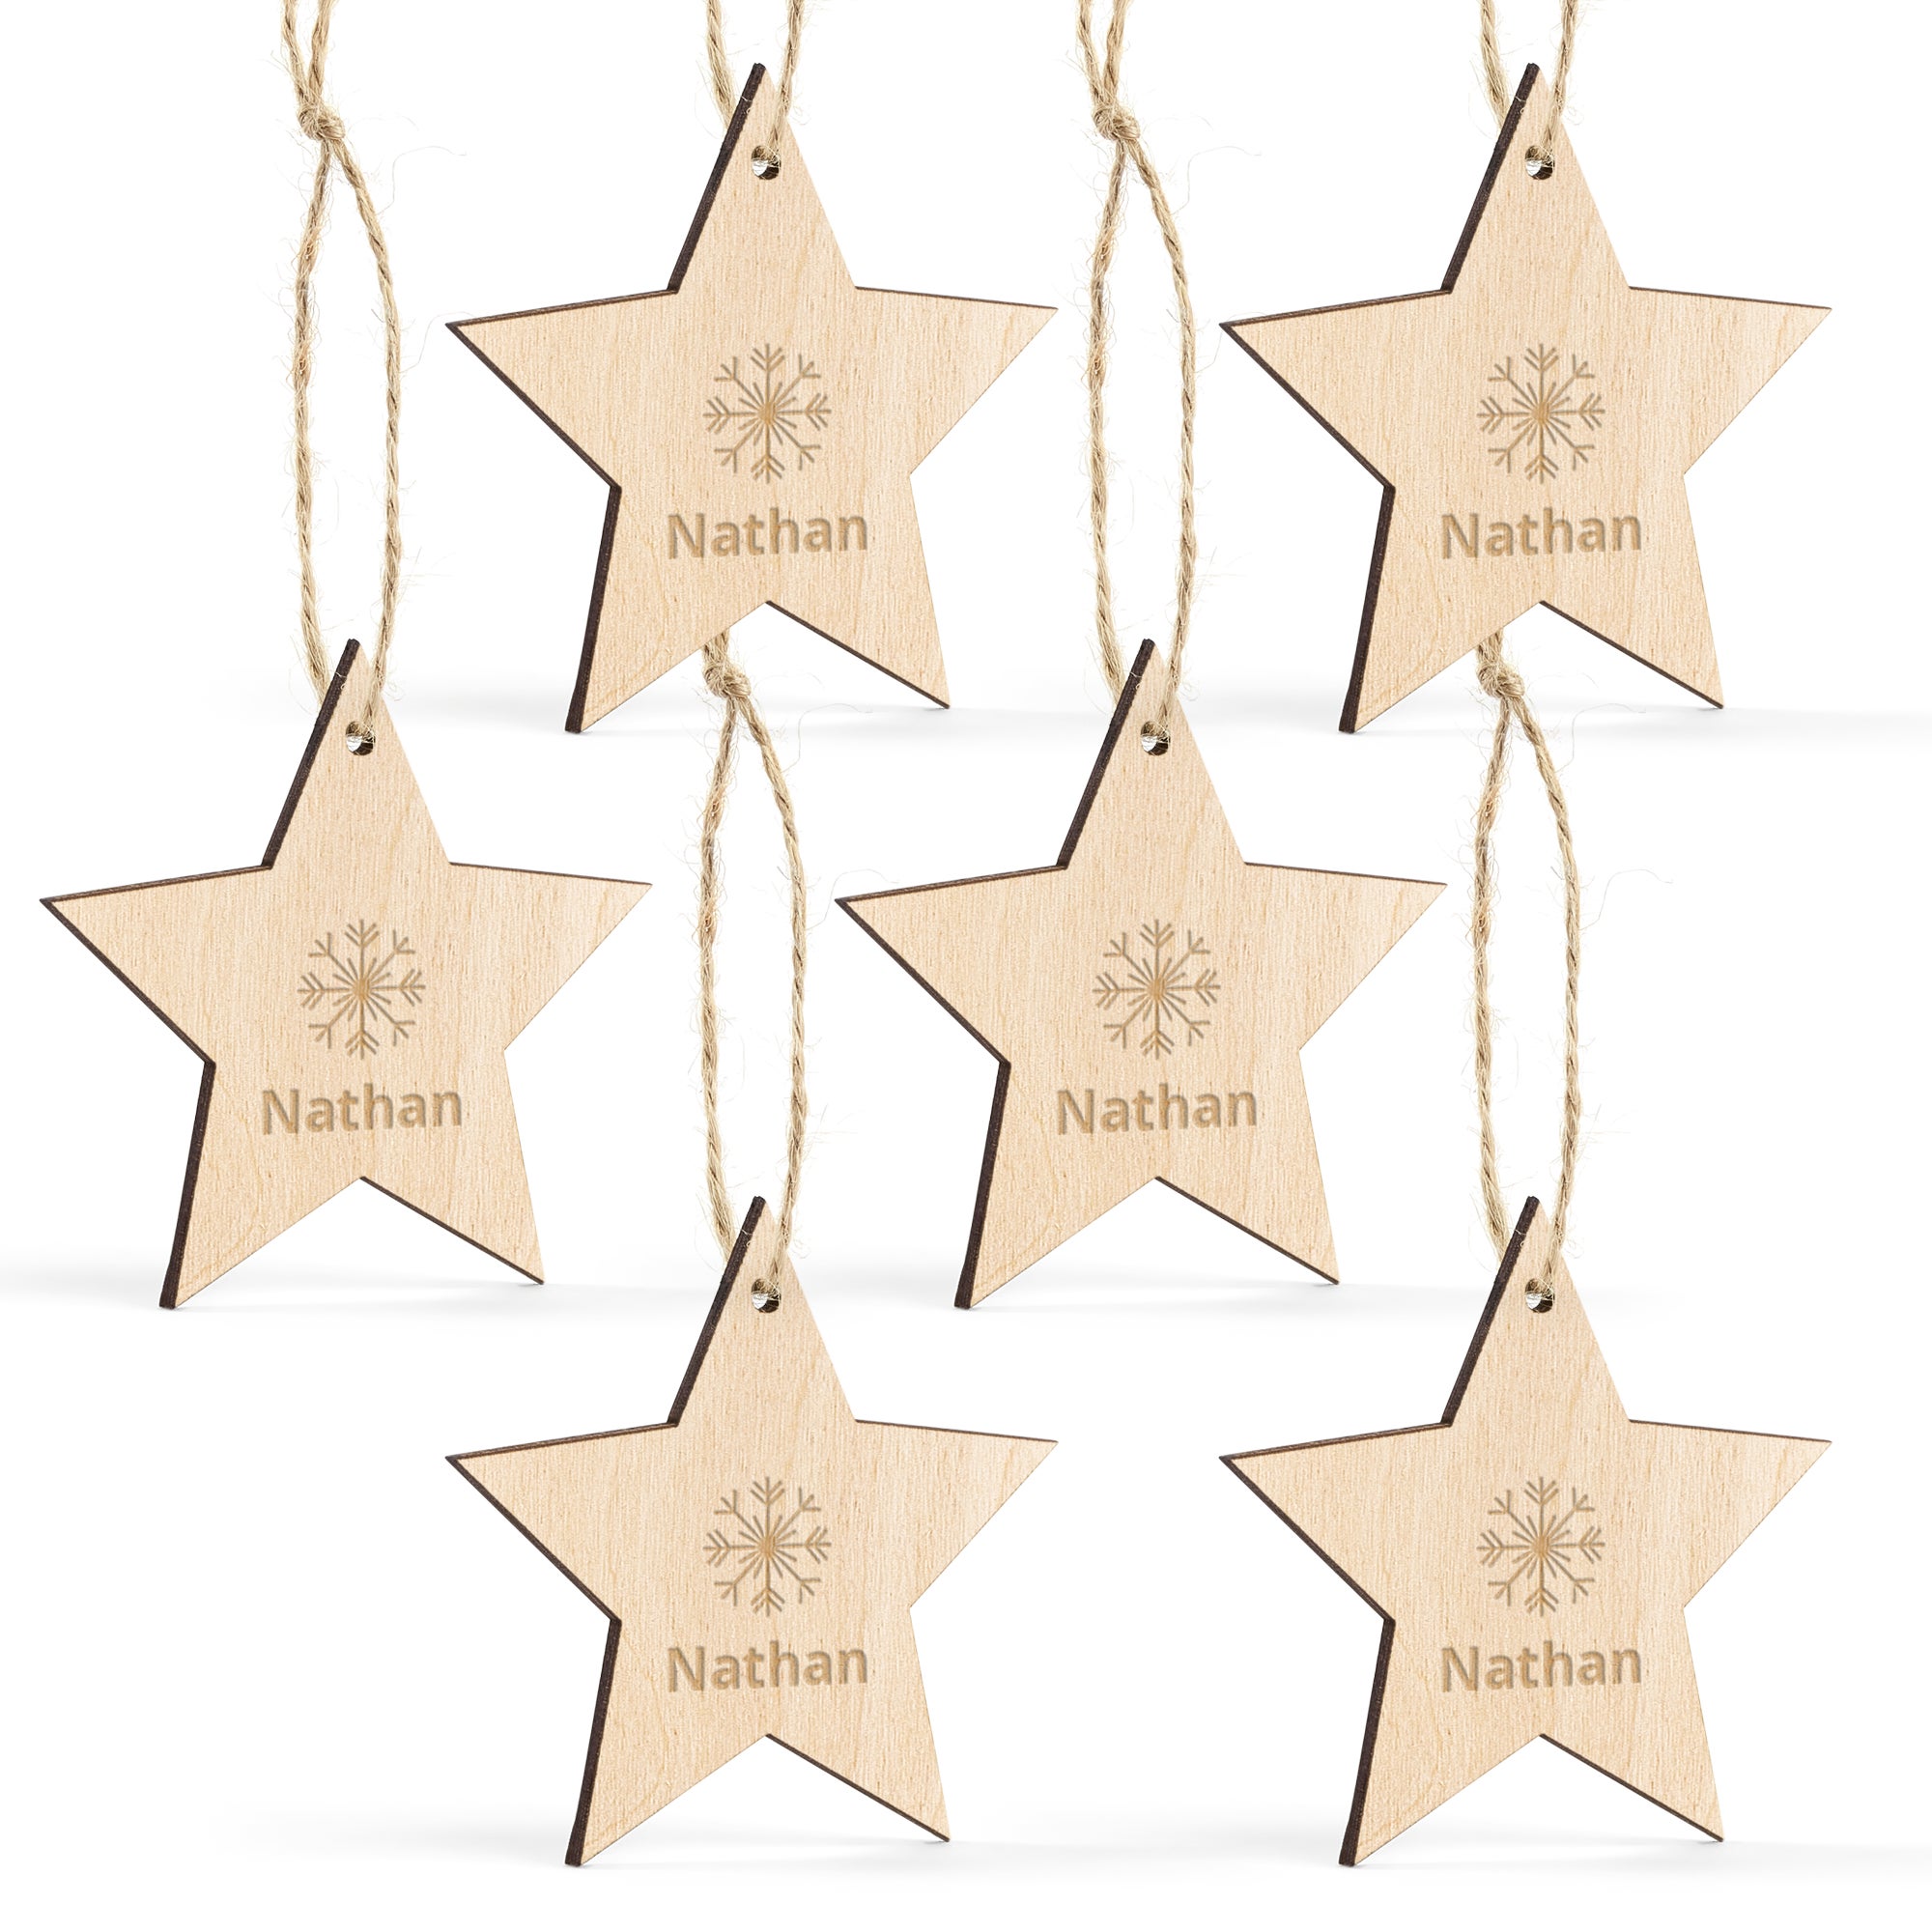 Personalised Christmas decorations - Wood - Engraved - Star - 6 pcs